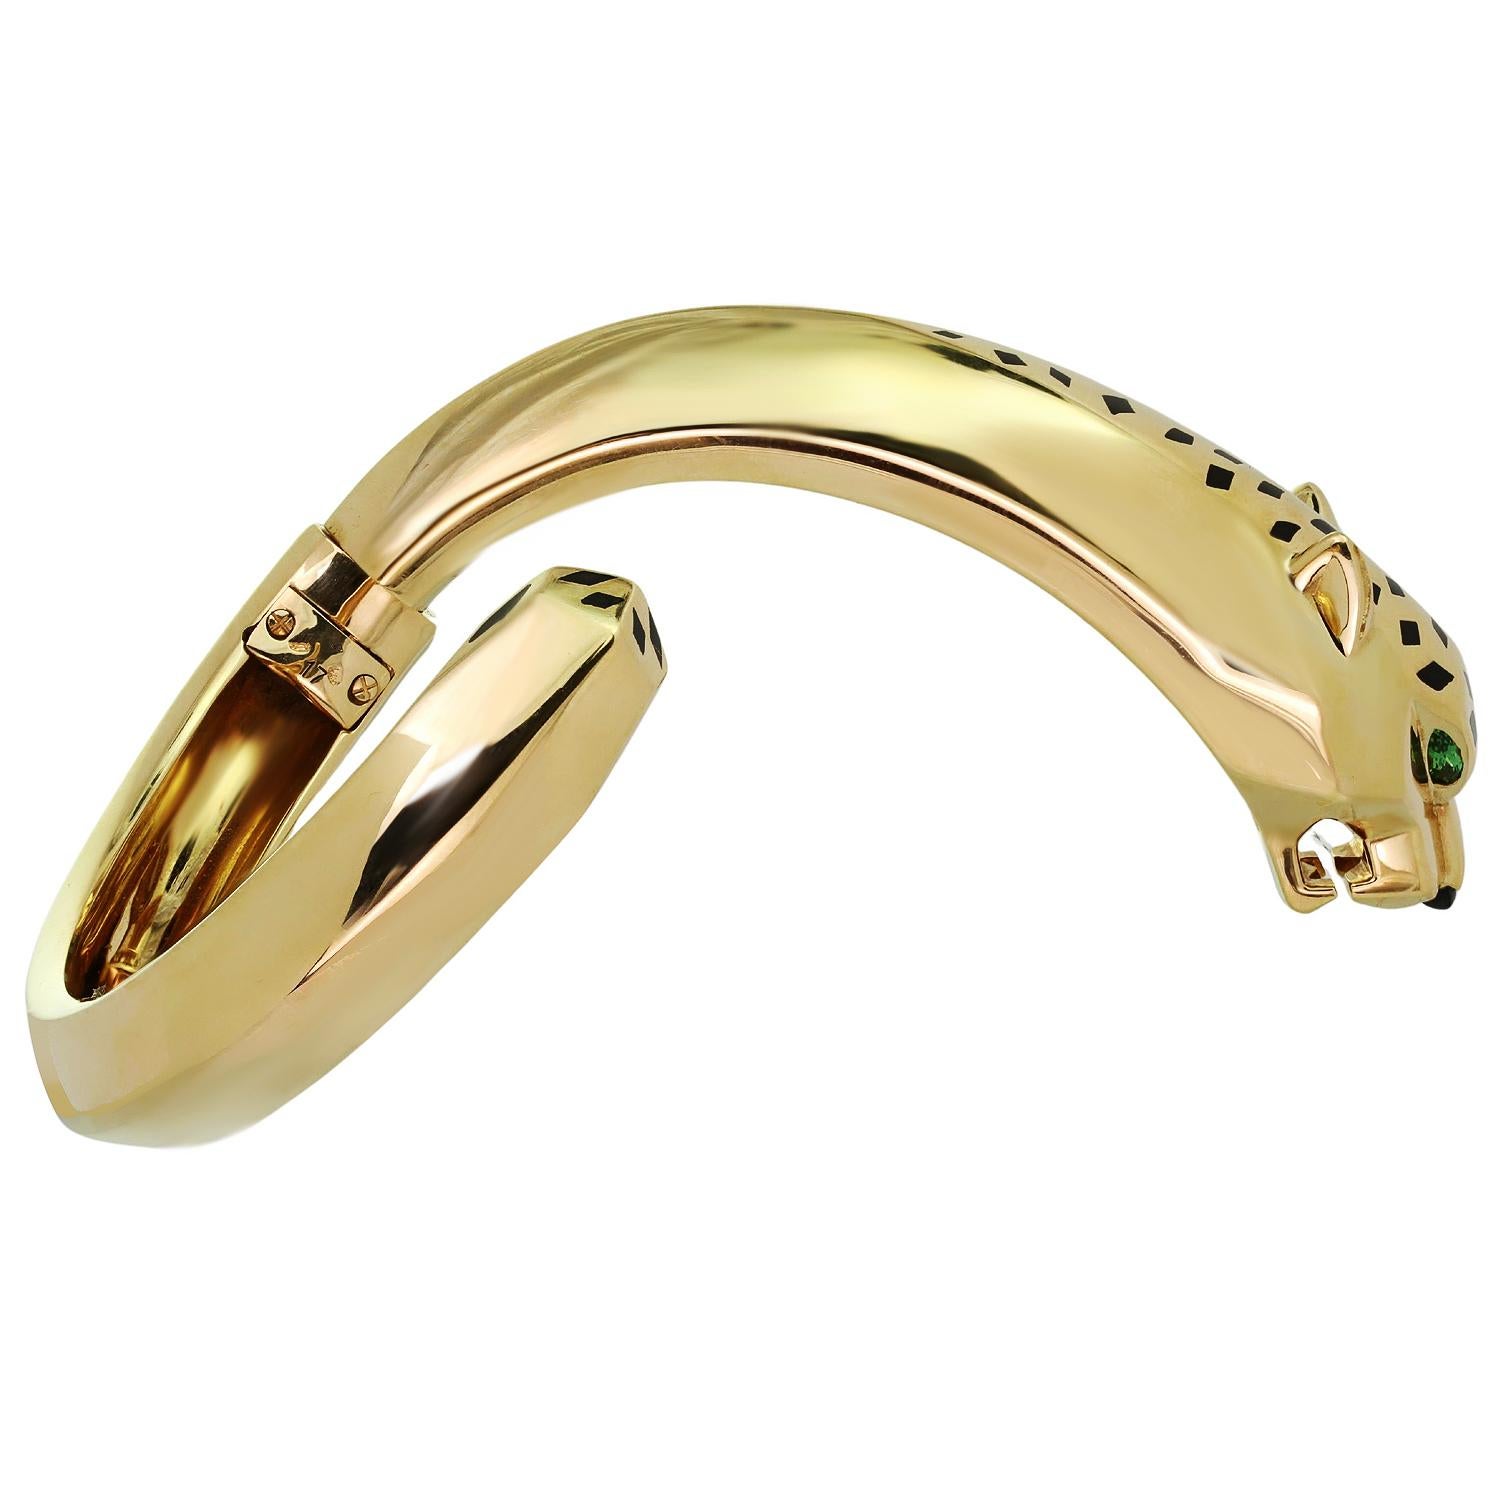 CARTIER Panthère de Cartier Garnet Onyx Lacquer Yellow Gold Bangle Bracelet In Excellent Condition For Sale In New York, NY